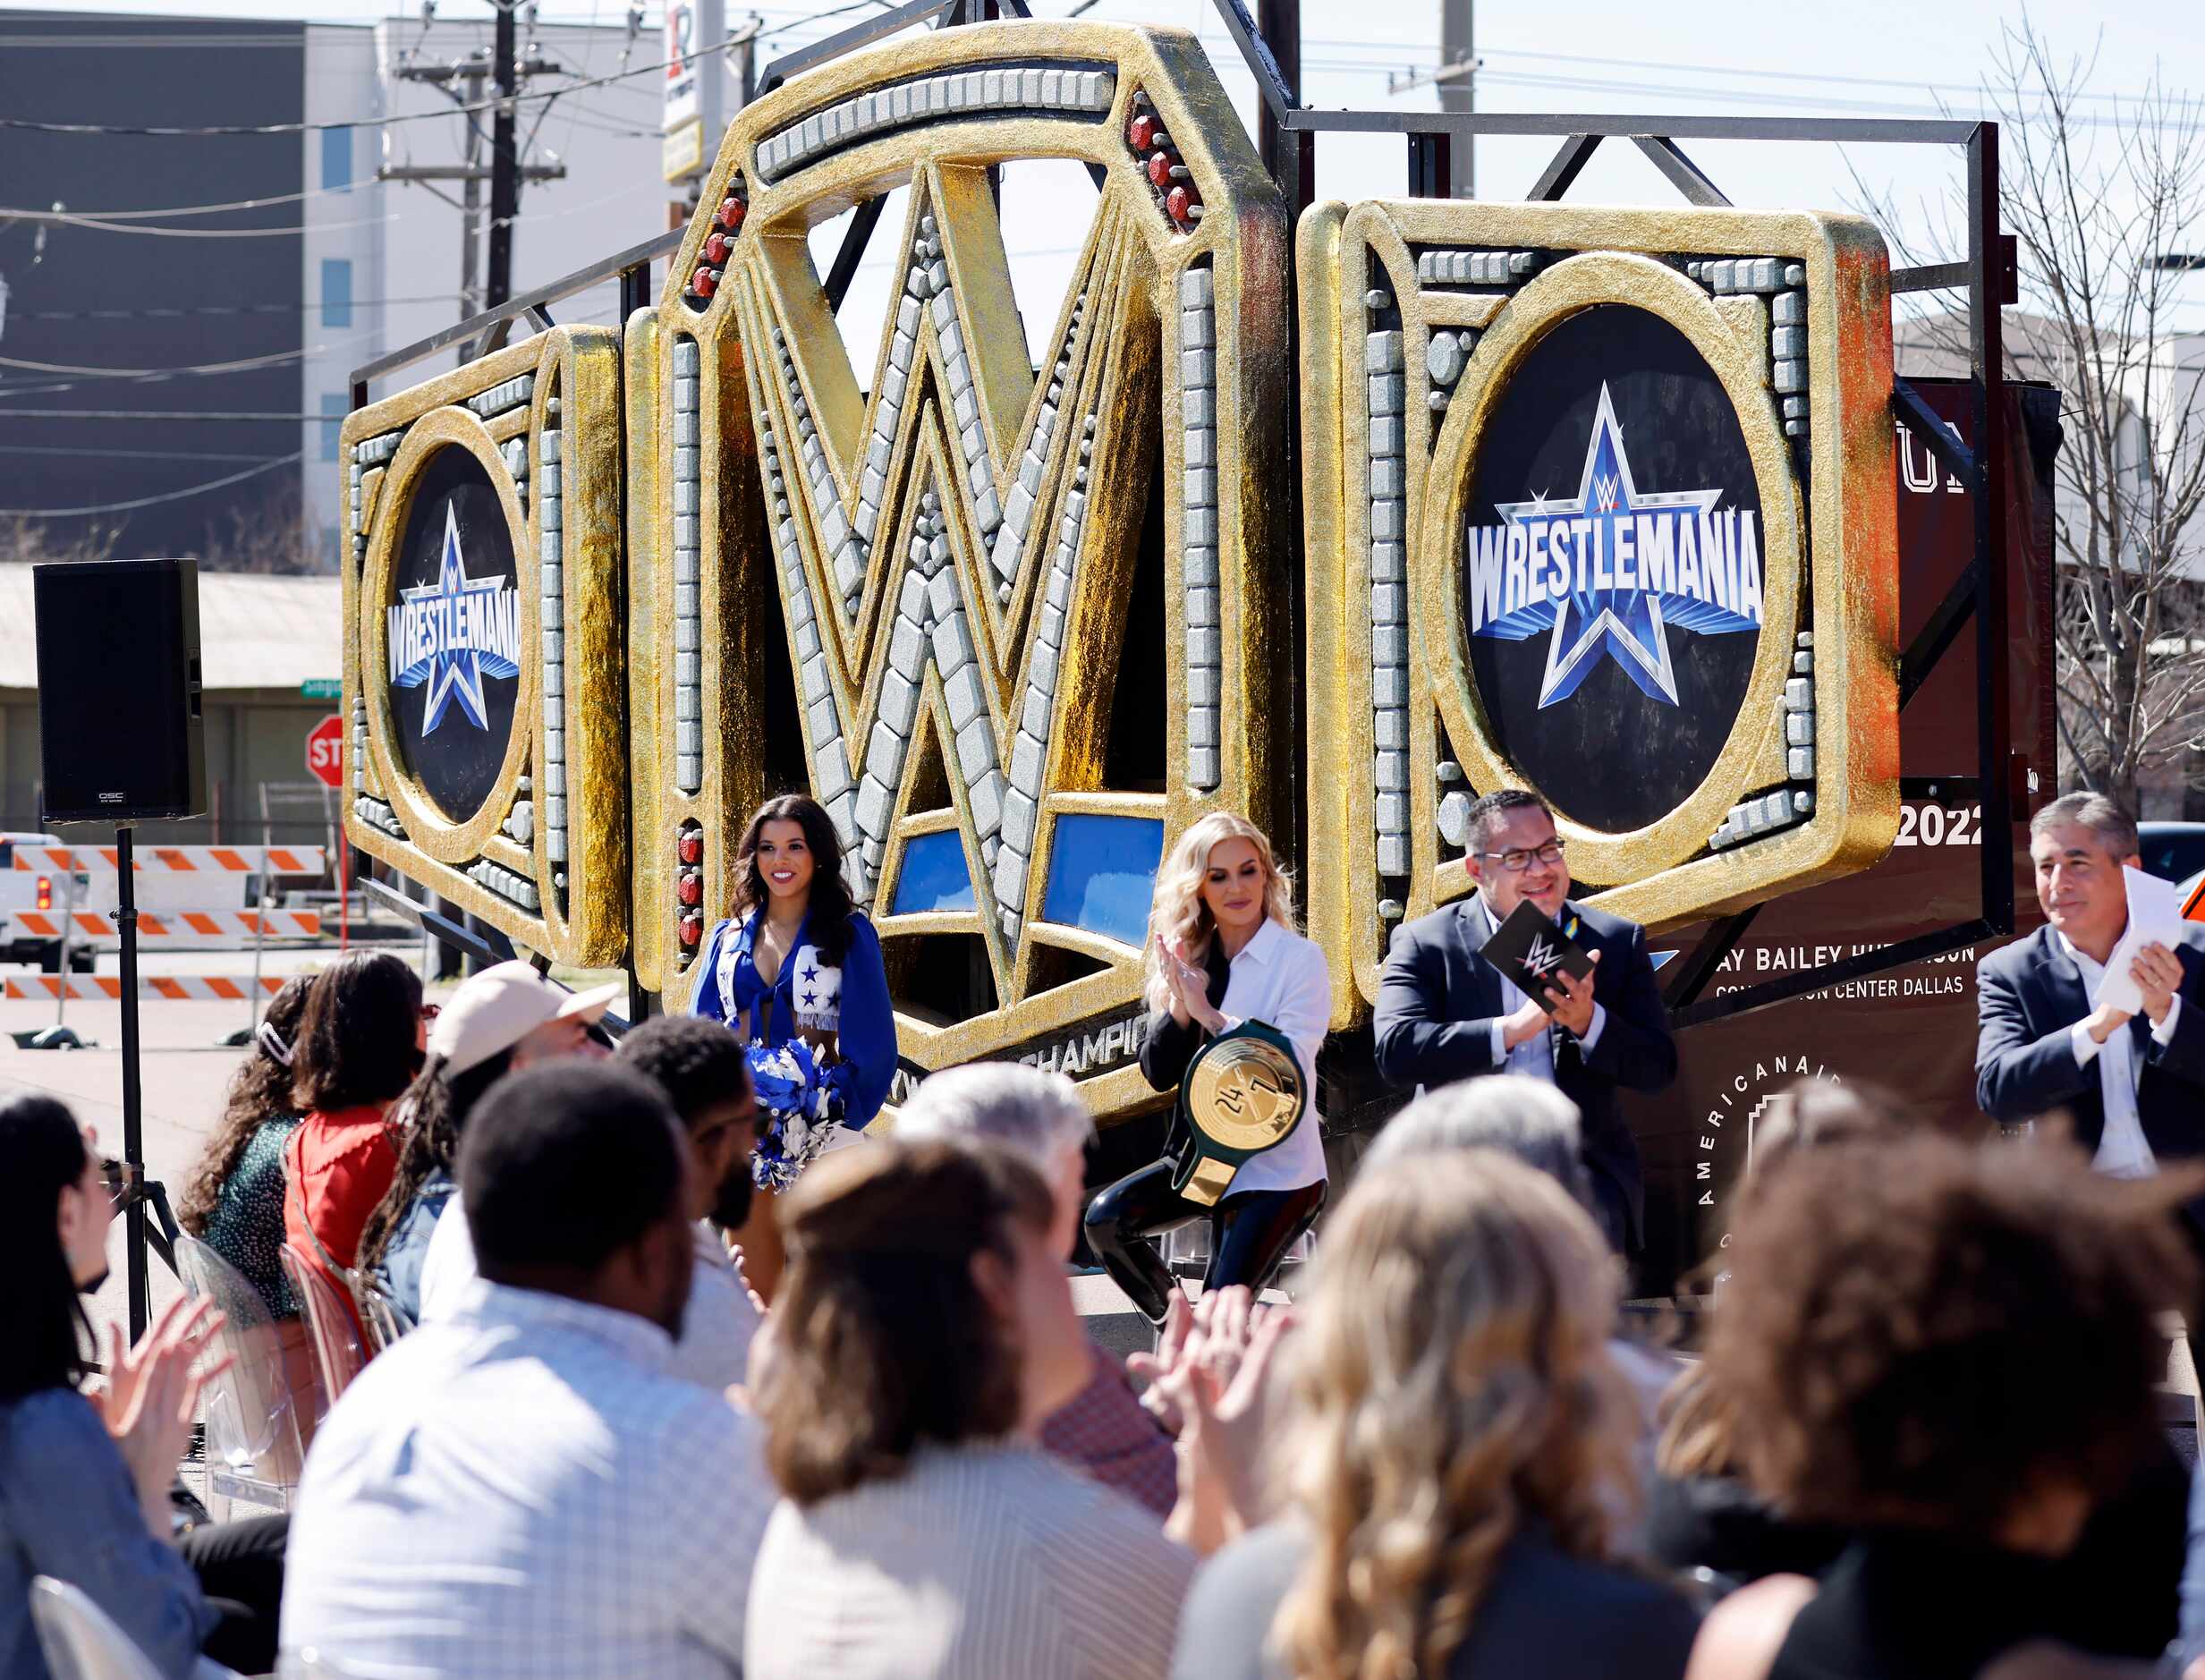 Wrestling superstars, local officials and Dallas Cowboys players were on hand for the...